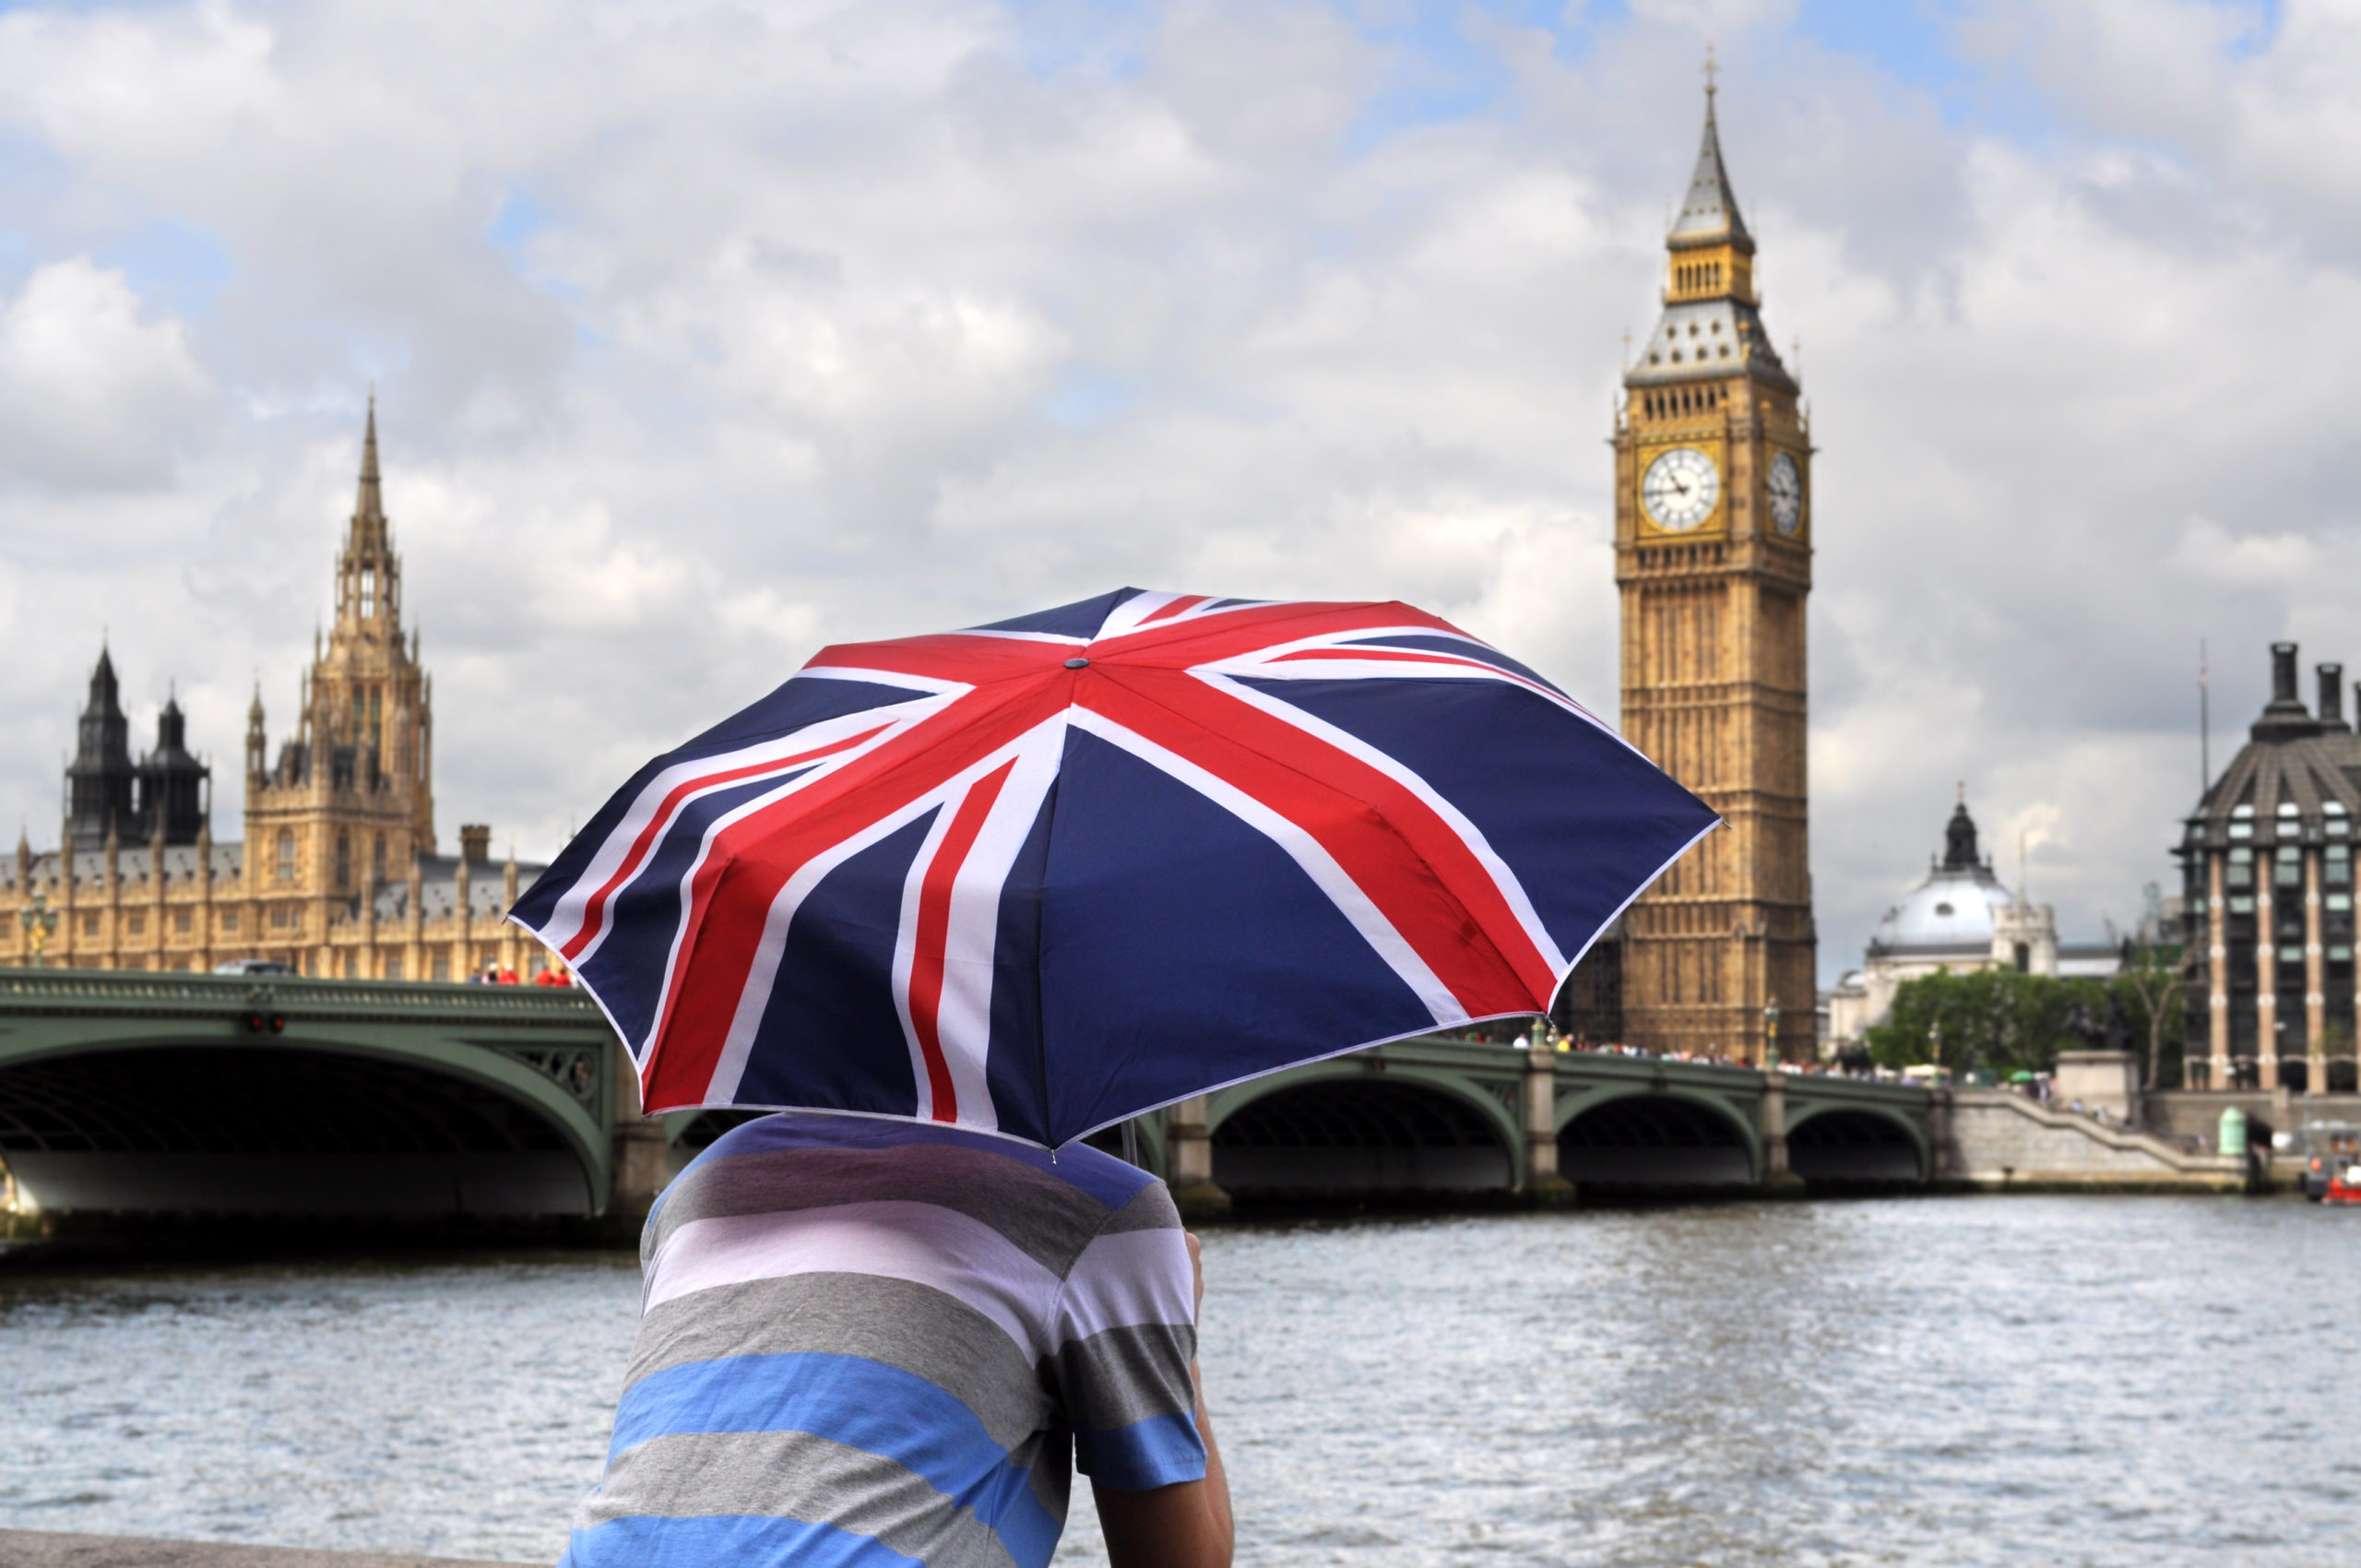 Big Ben and tourist with British flag umbrella in Southbank, London